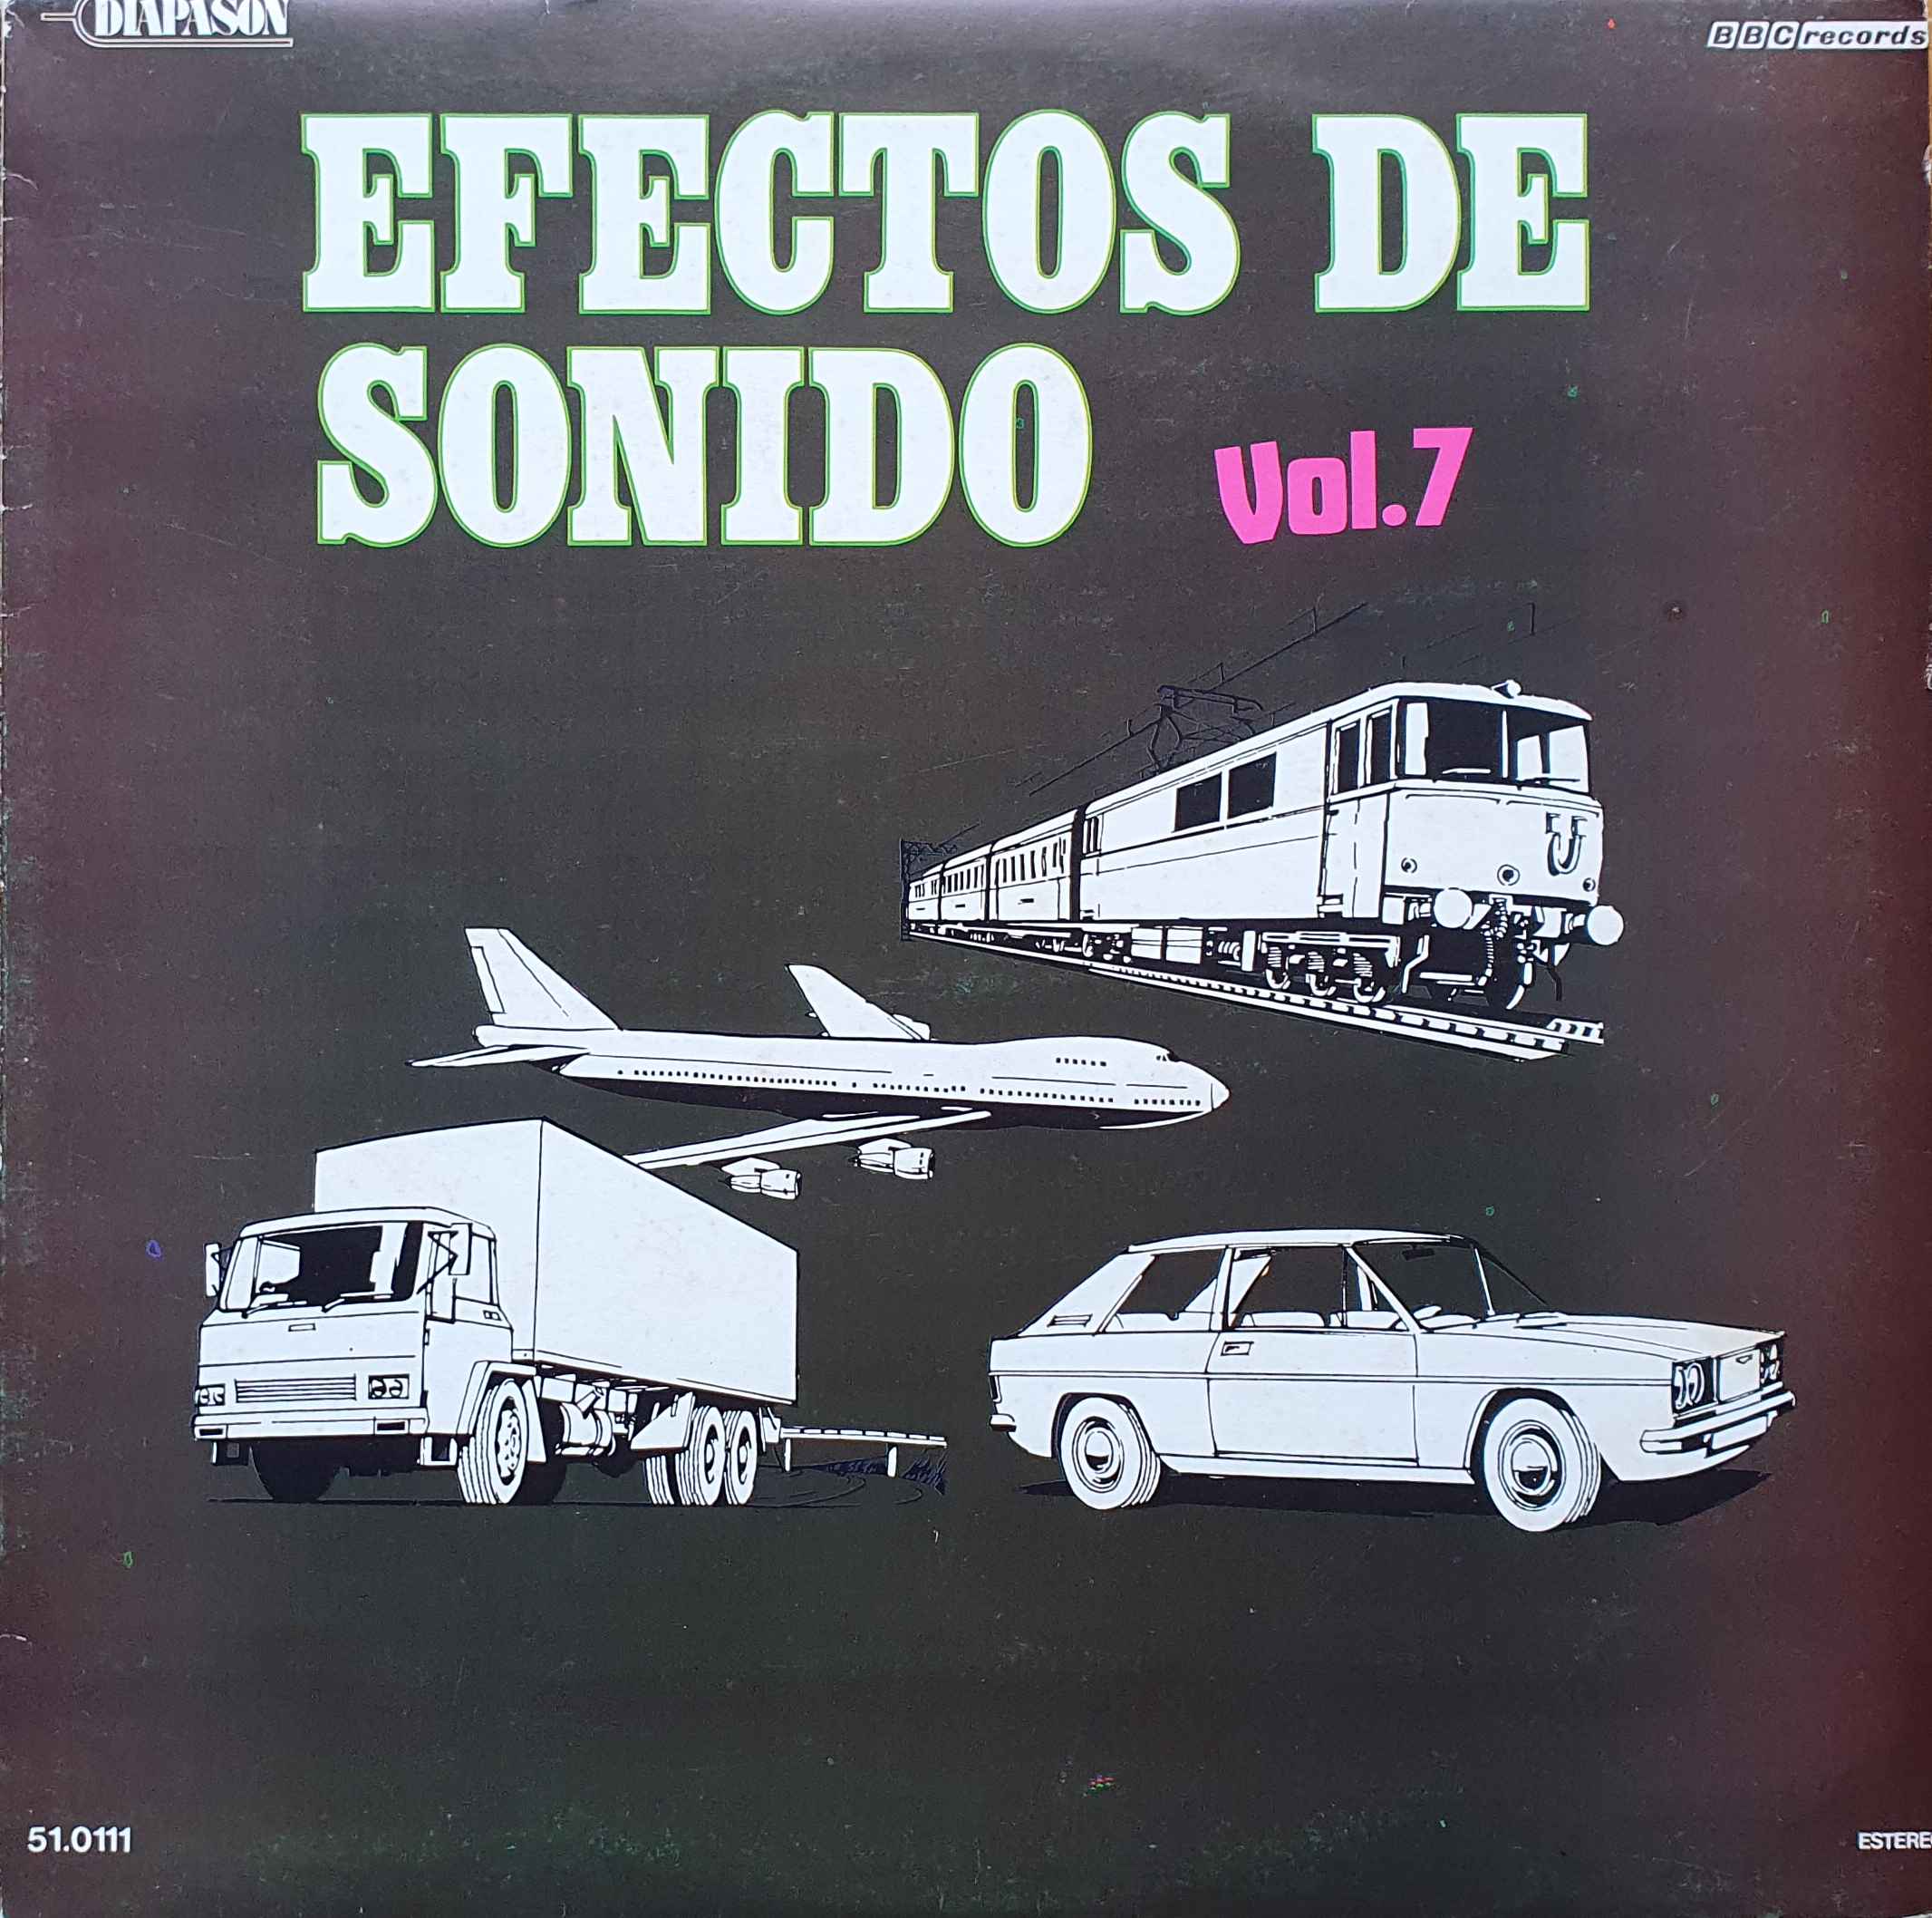 Picture of 51.0111 Efectos de sonido No 7 by artist Various from the BBC albums - Records and Tapes library